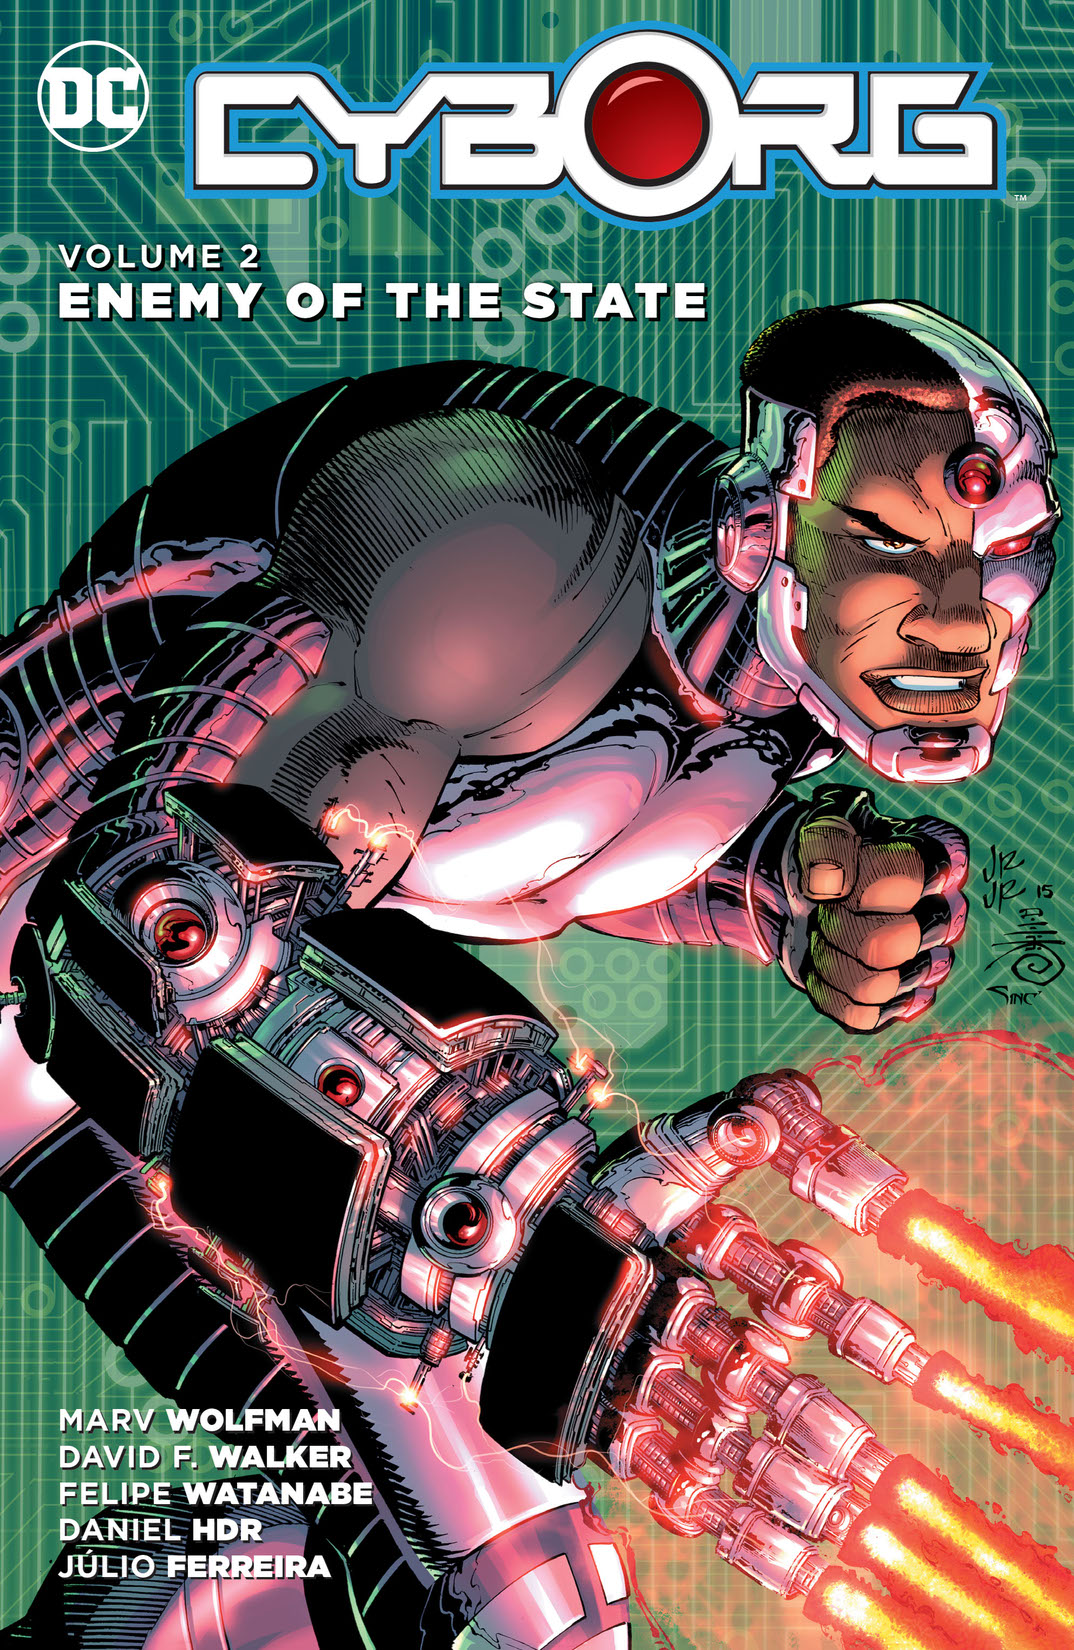 Cyborg Vol. 2: Enemy of the State preview images